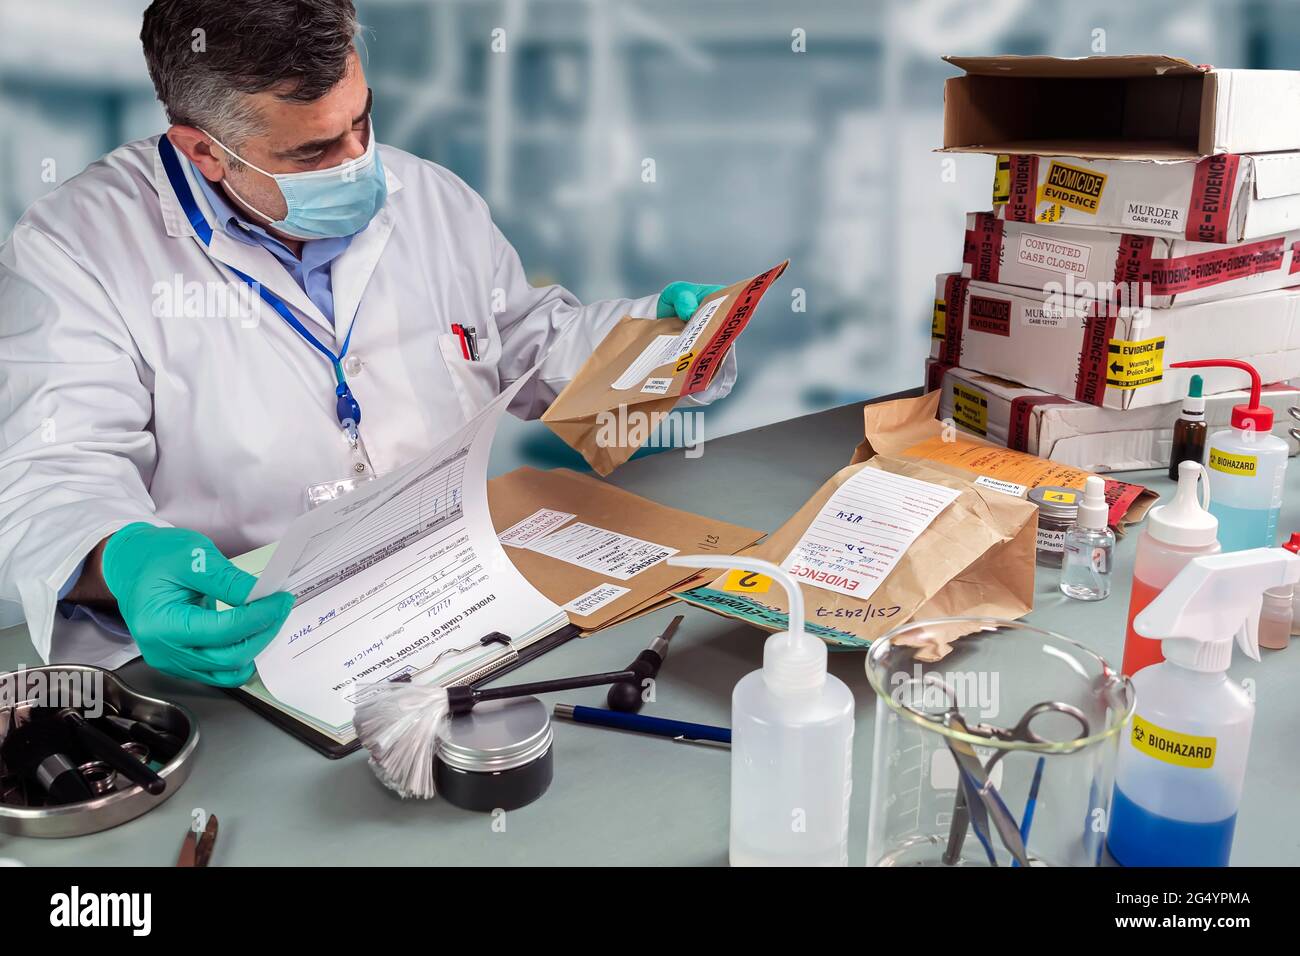 Forensic police check files against evidence in crime lab, conceptual image Stock Photo